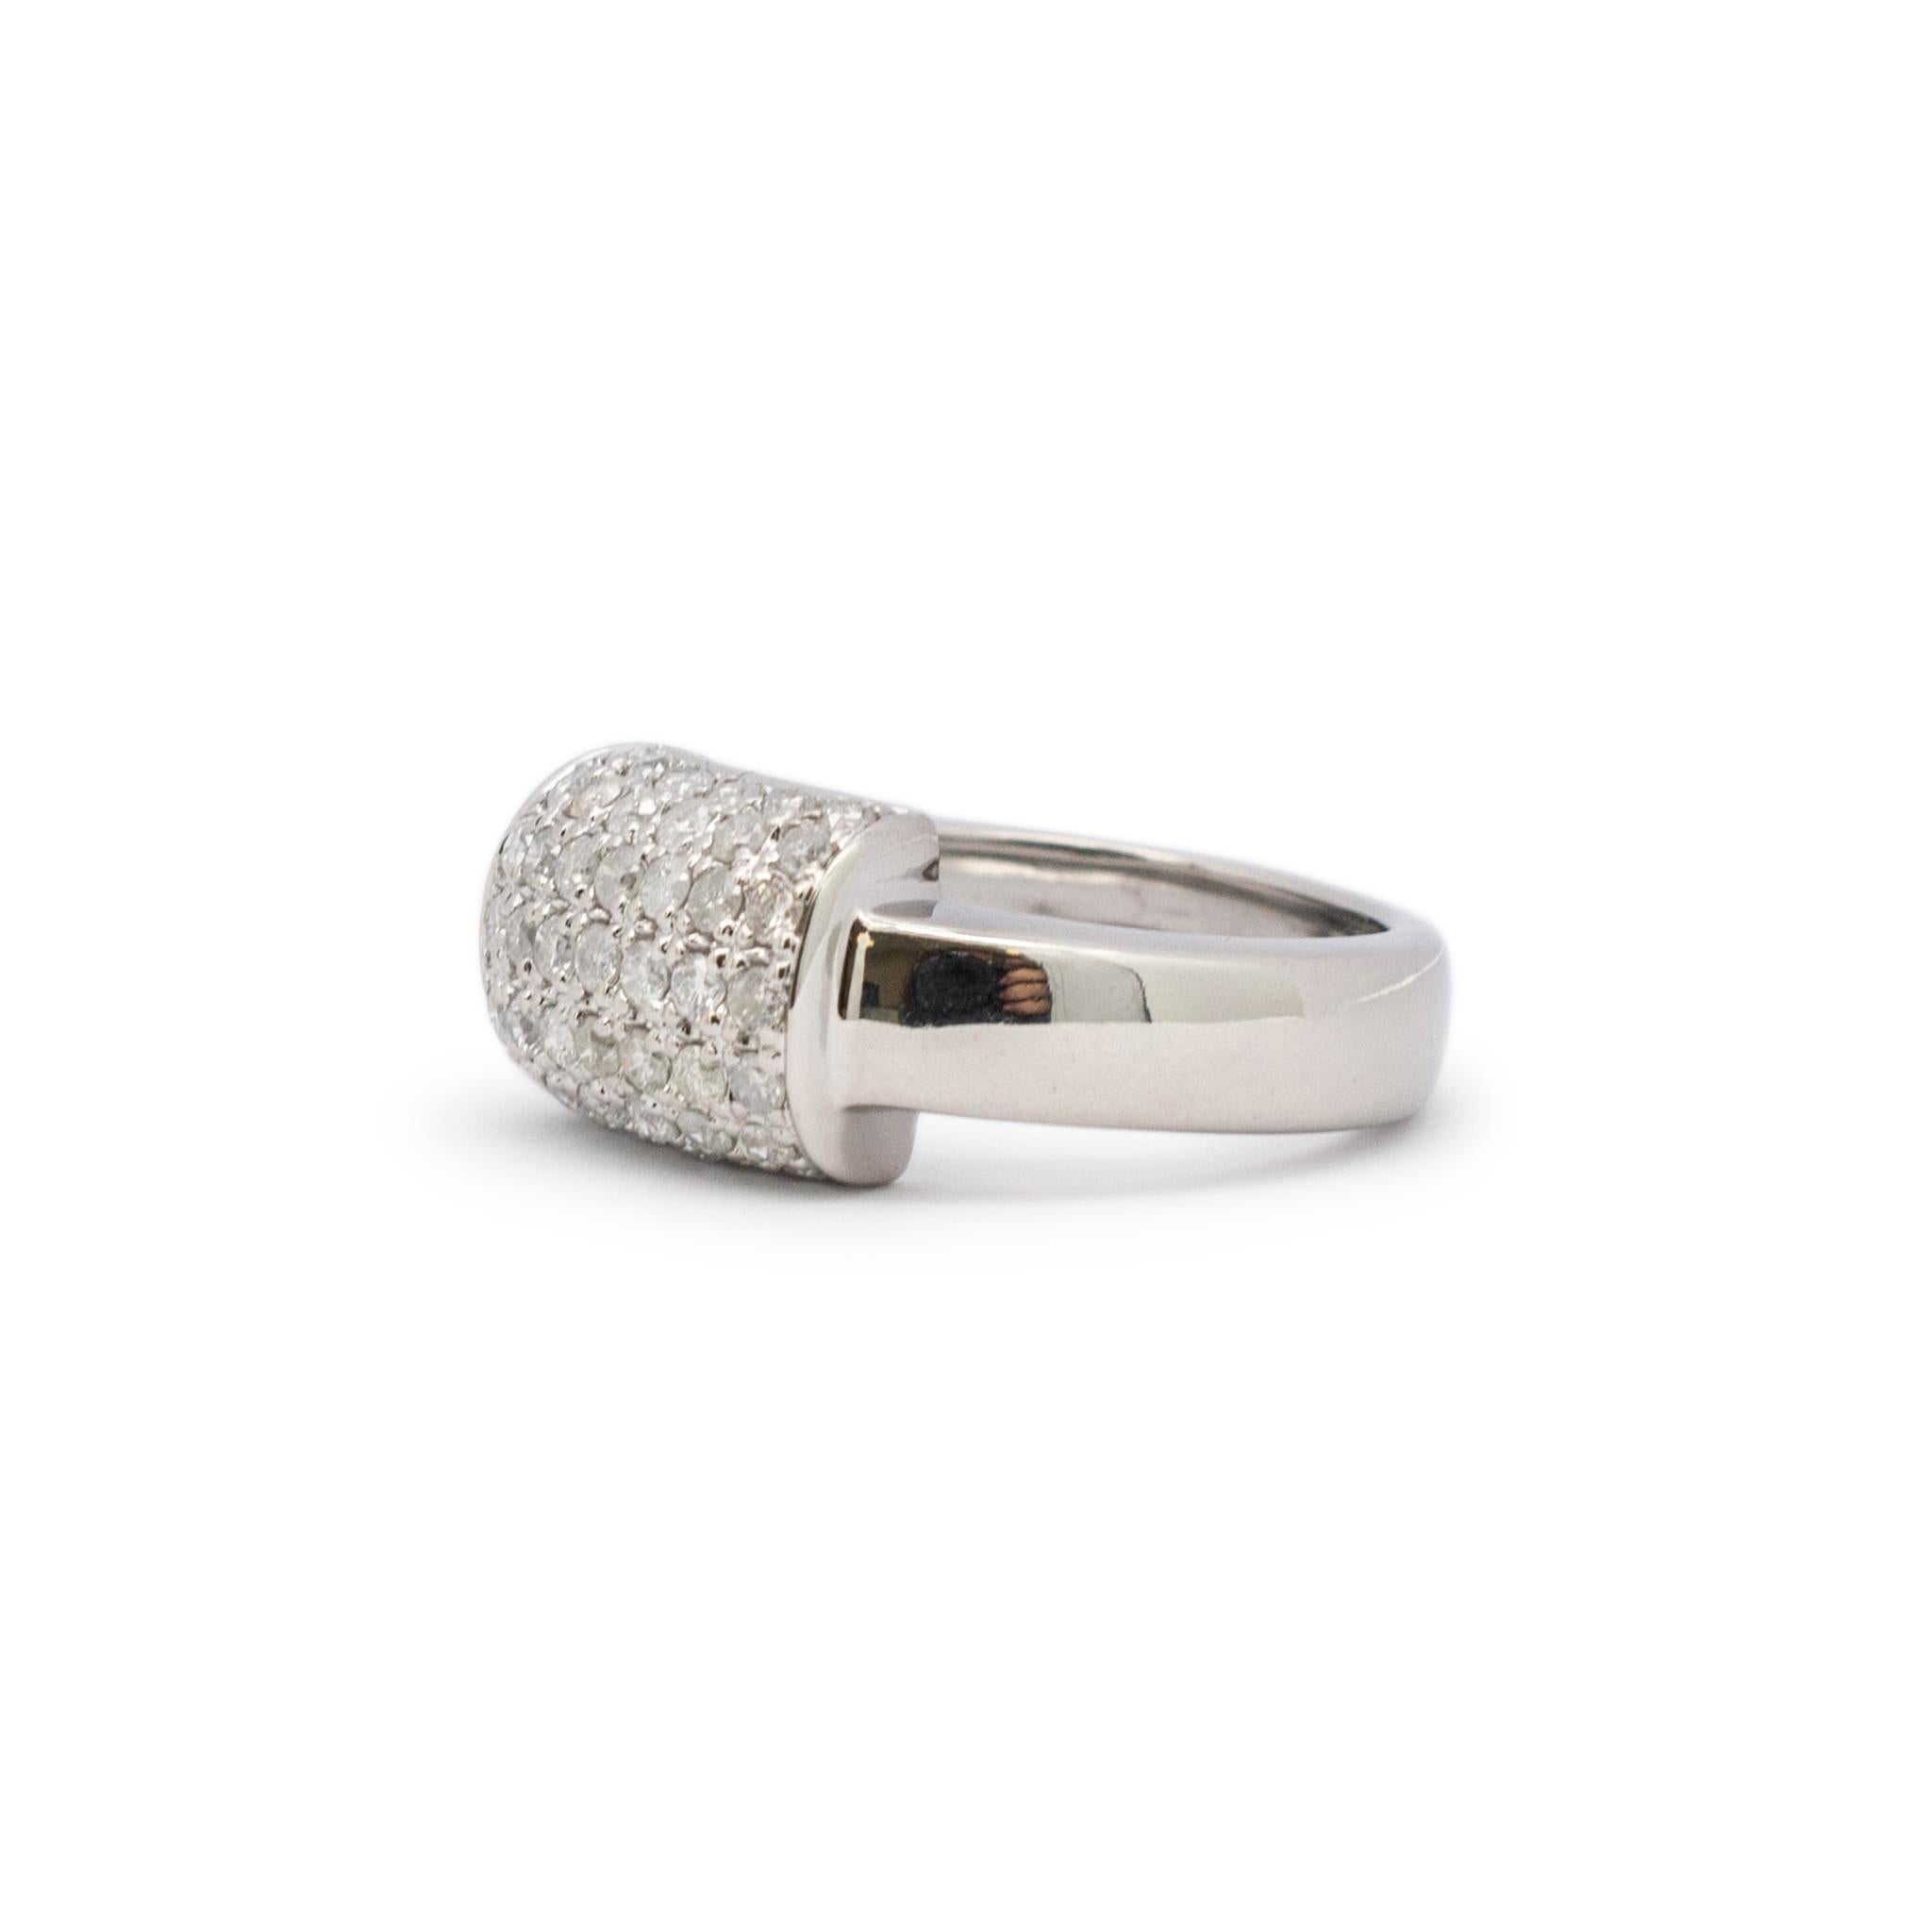 Women's Ladies 14k White Gold Pave Diamond Cocktail Ring For Sale